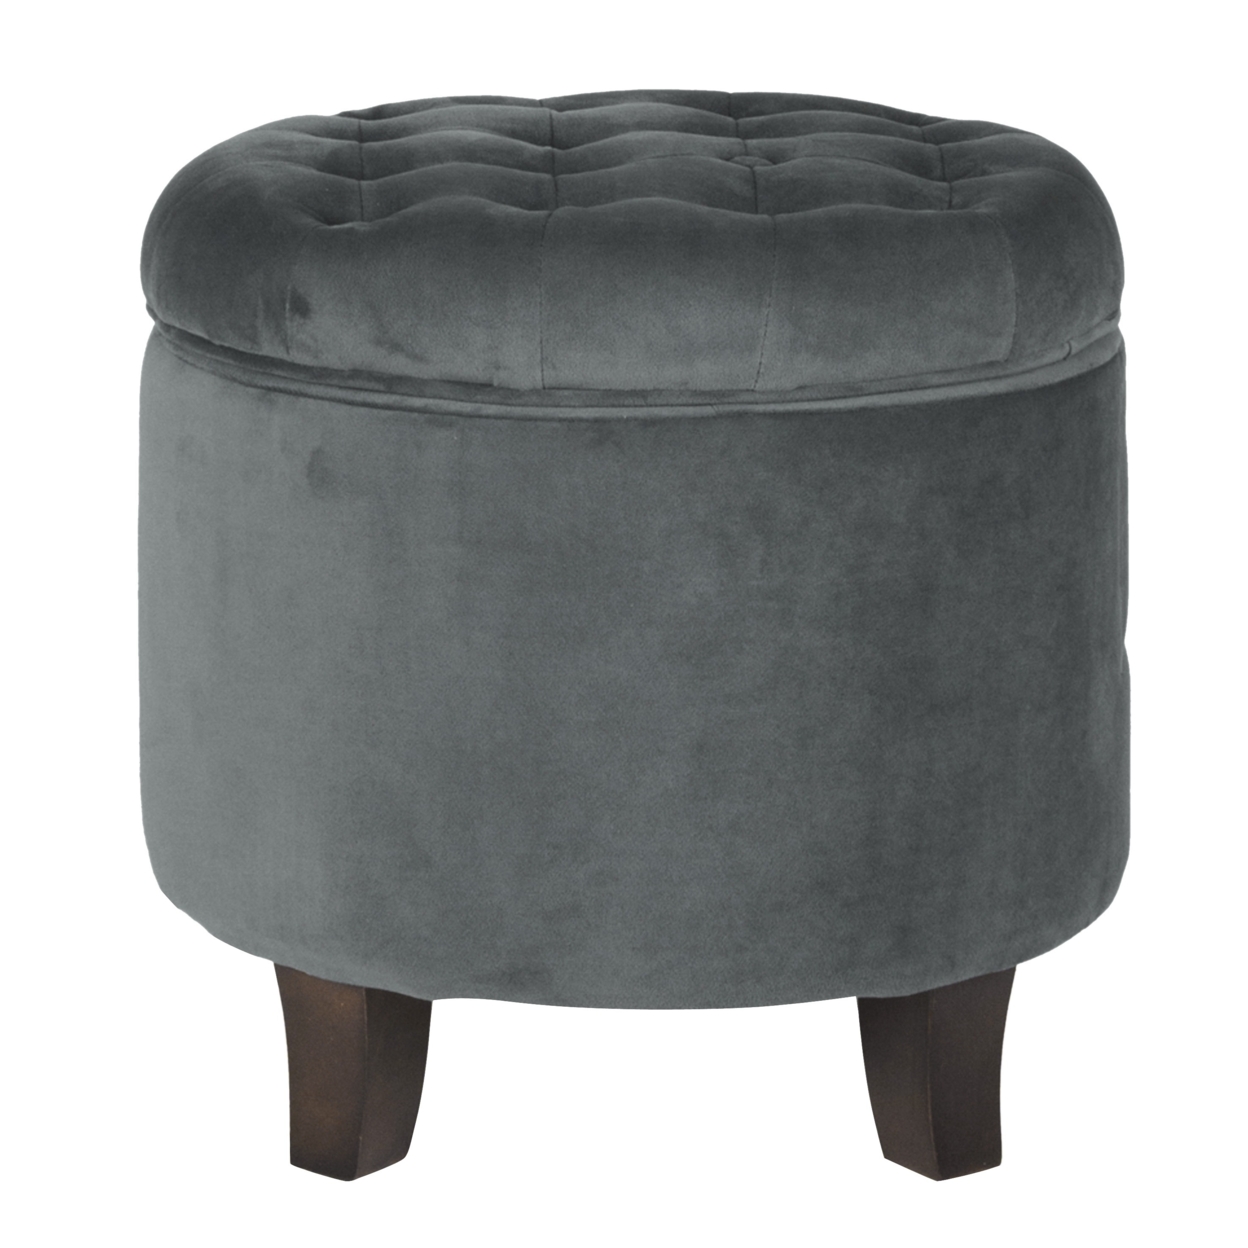 Button Tufted Velvet Upholstered Wooden Ottoman With Hidden Storage, Gray And Brown- Saltoro Sherpi